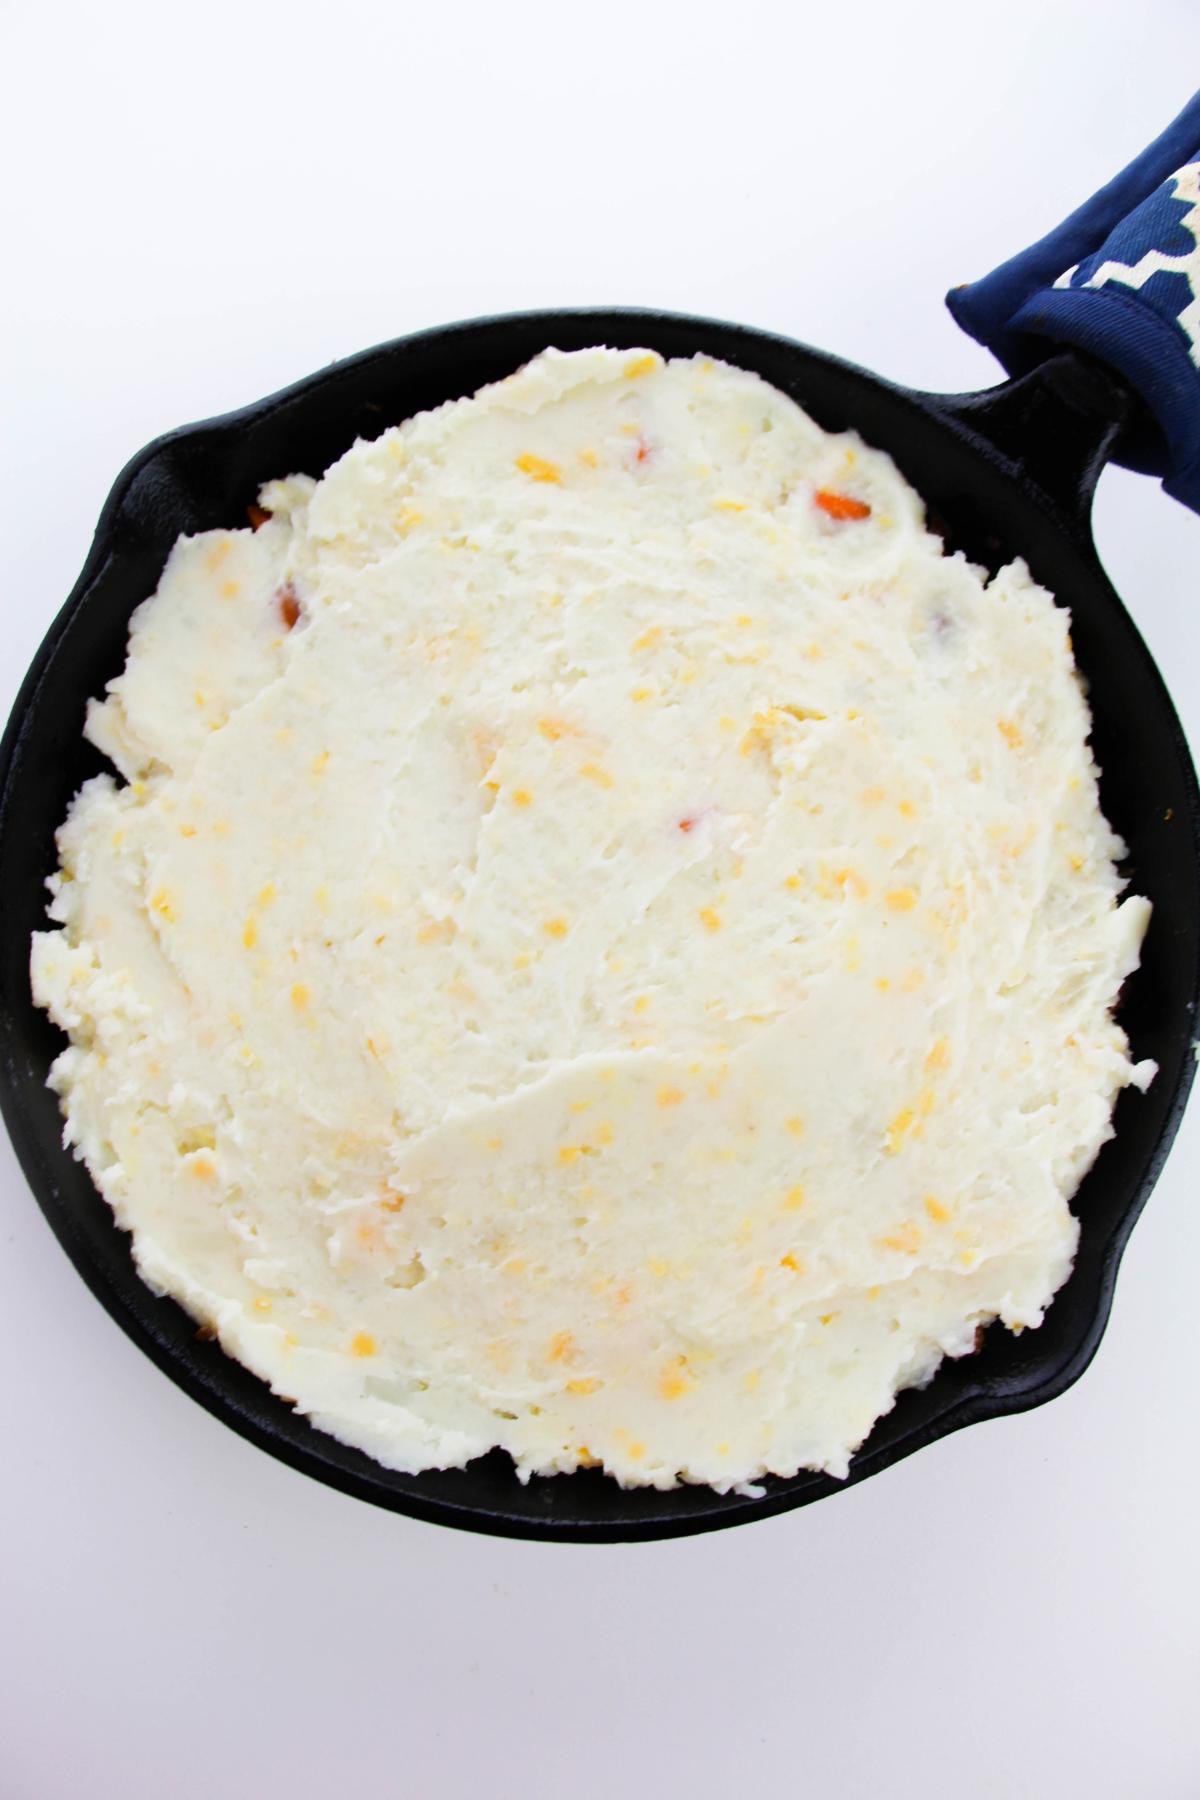 Mashed potato over the meat and vegetable filling in a cast iron skillet.